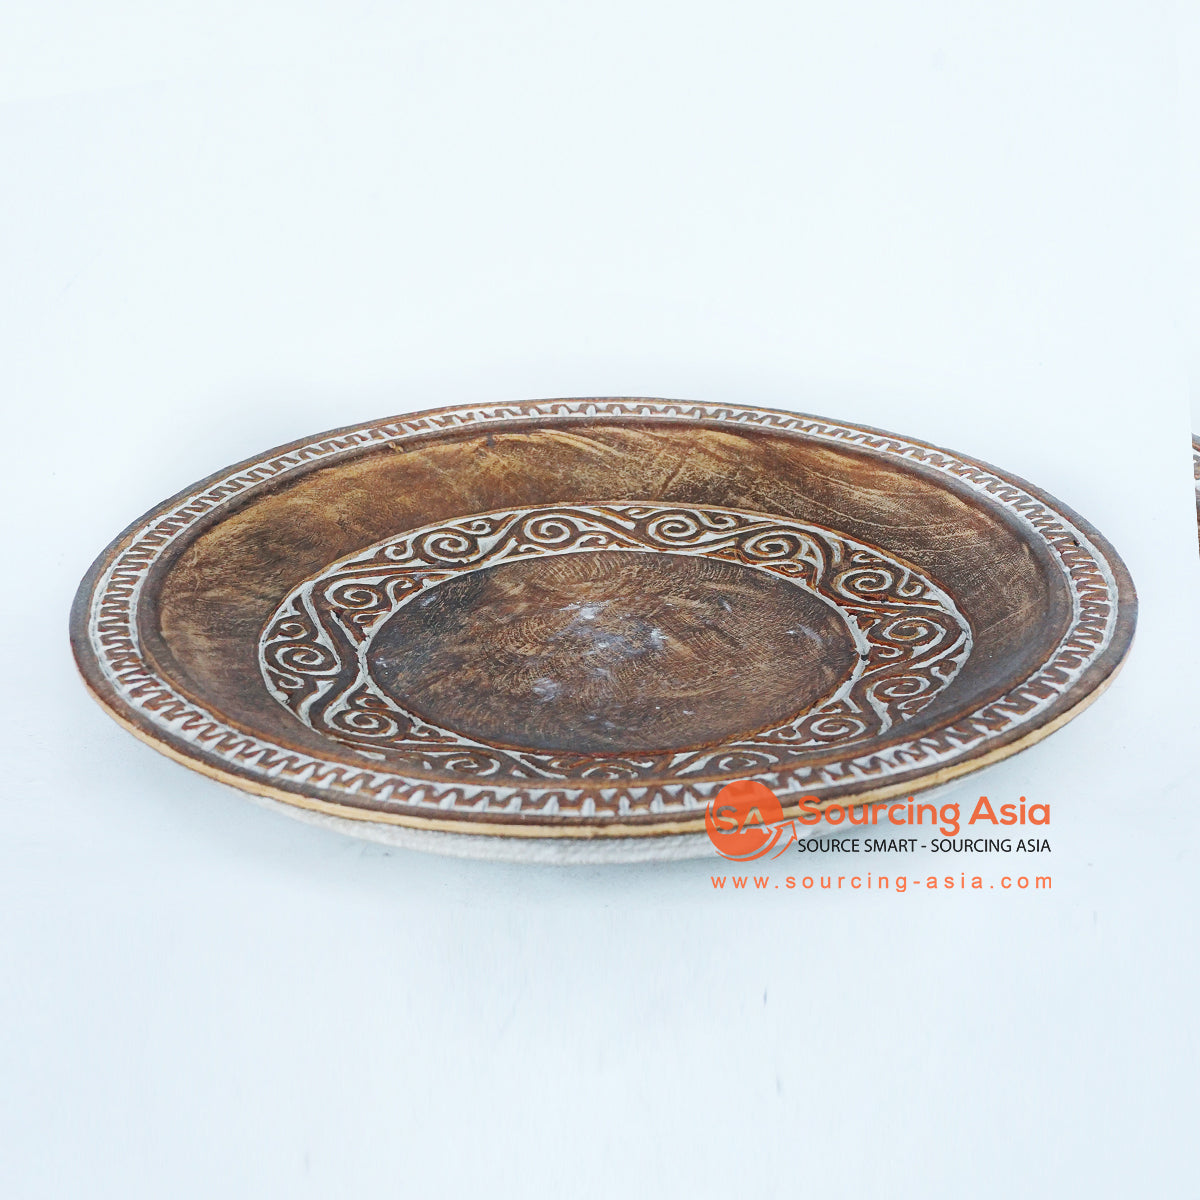 TKNC029-1 WOODEN ETHNIC TRIBAL CARVED PLATE